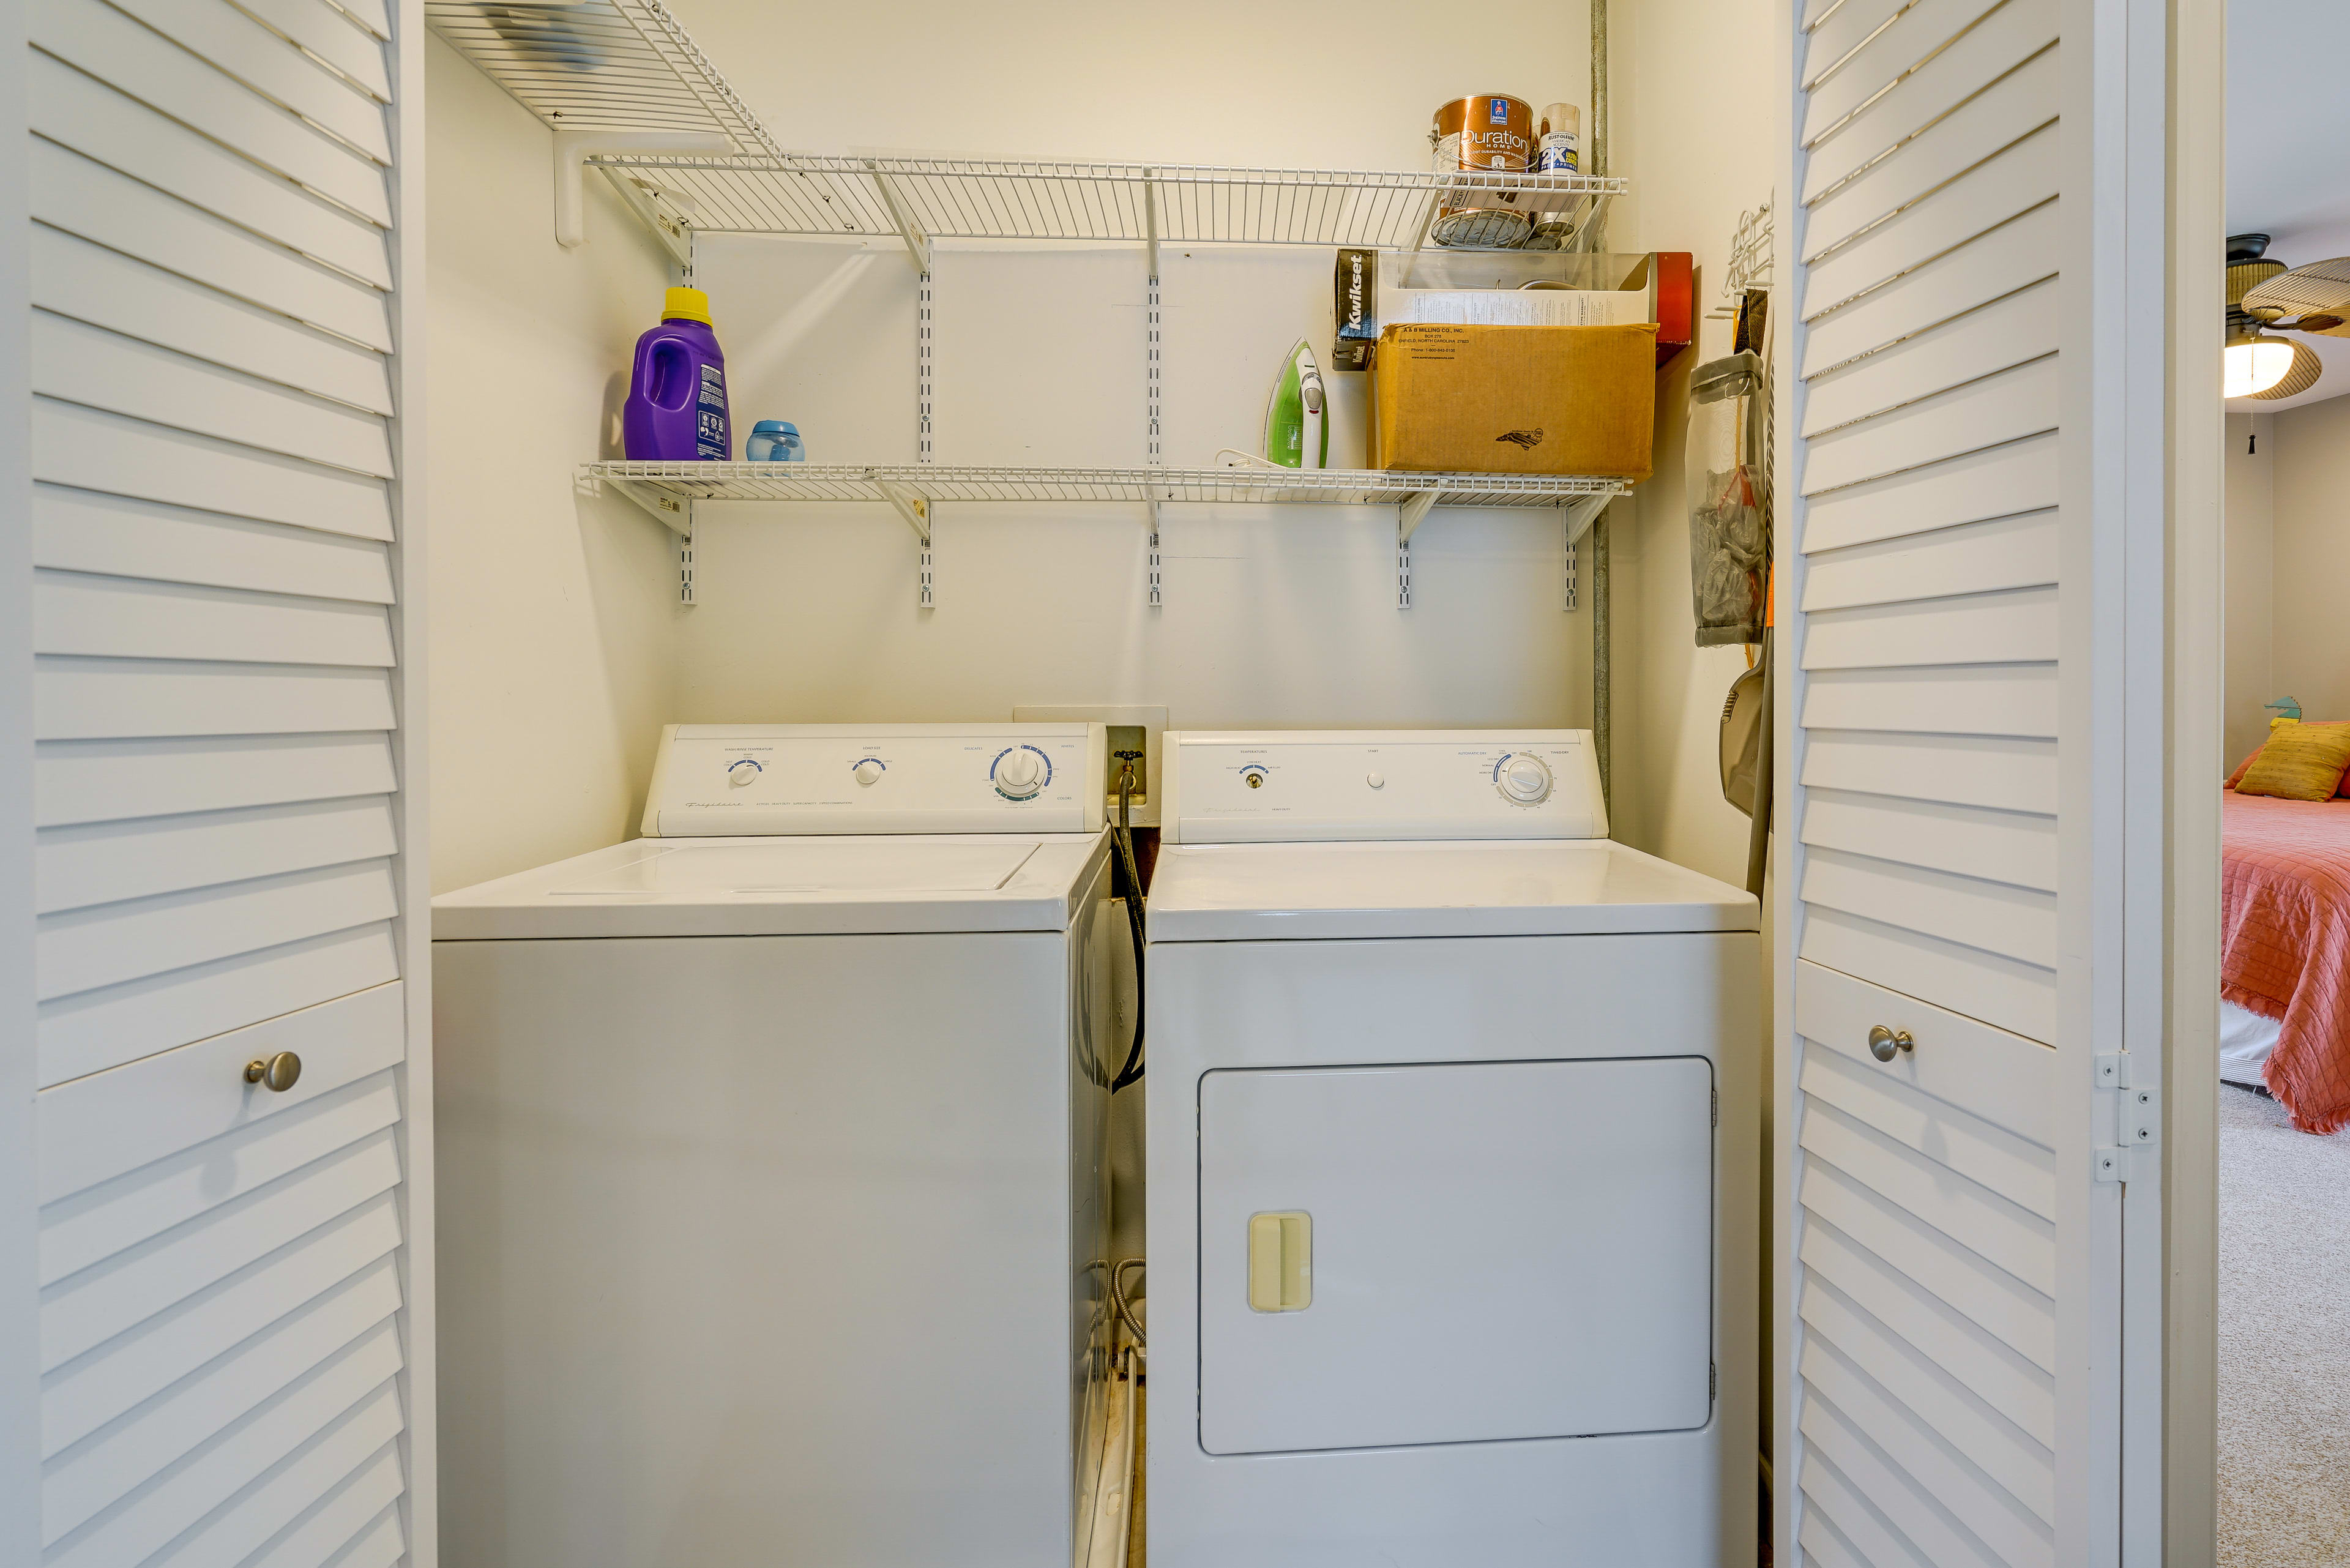 Laundry Closet | Laundry Detergent | Irons & Boards